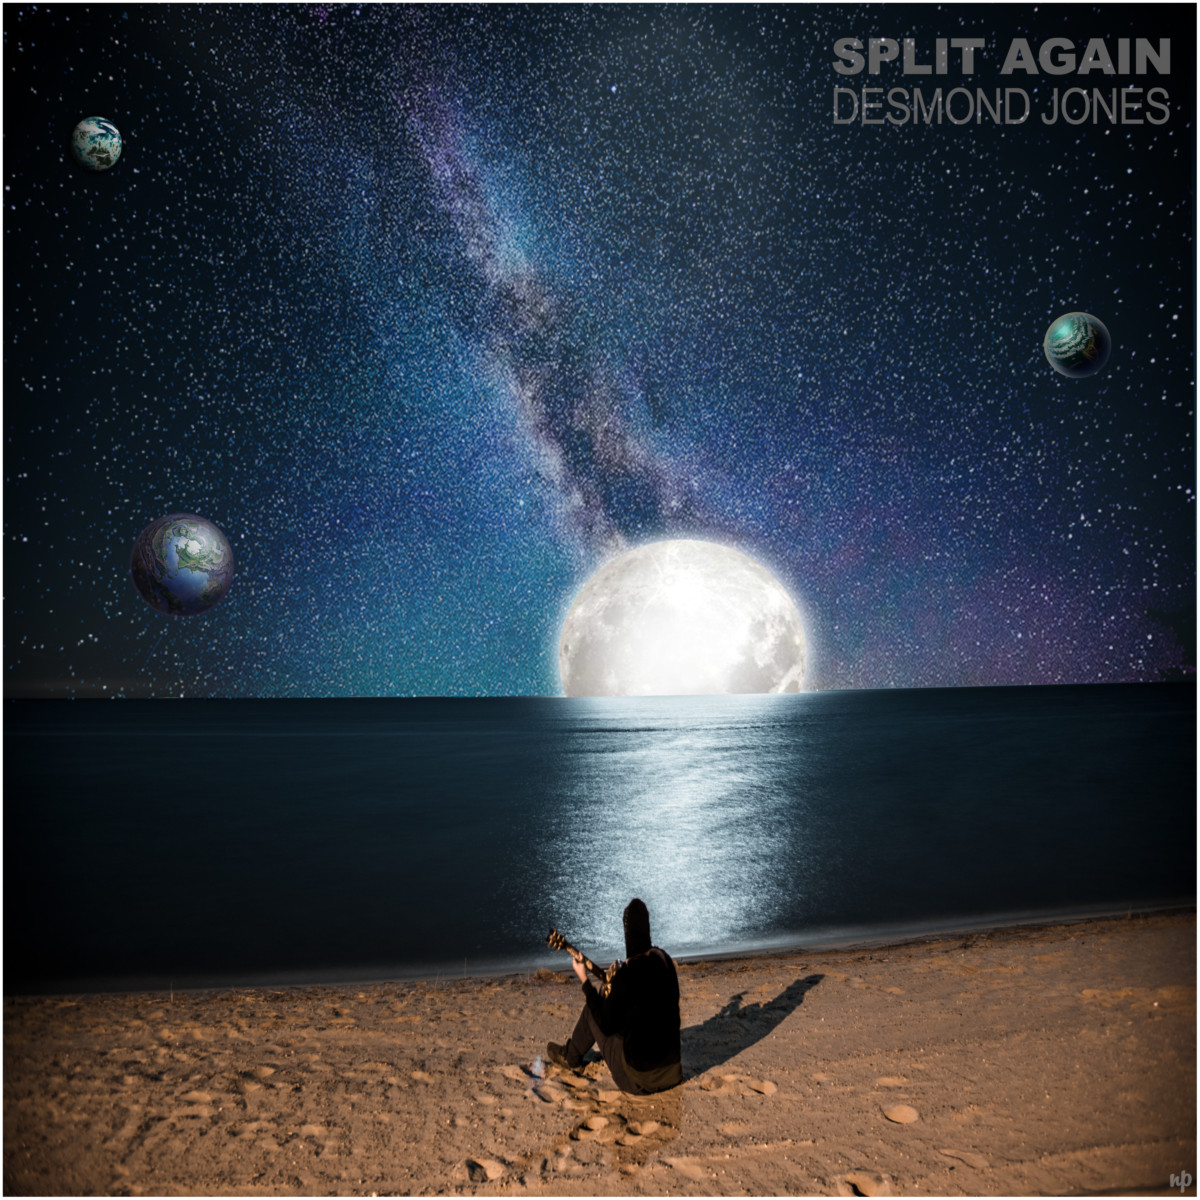 Single Review: Desmond Jones Releases New Track “Split Again” from their Unreleased Album Hello, Helou